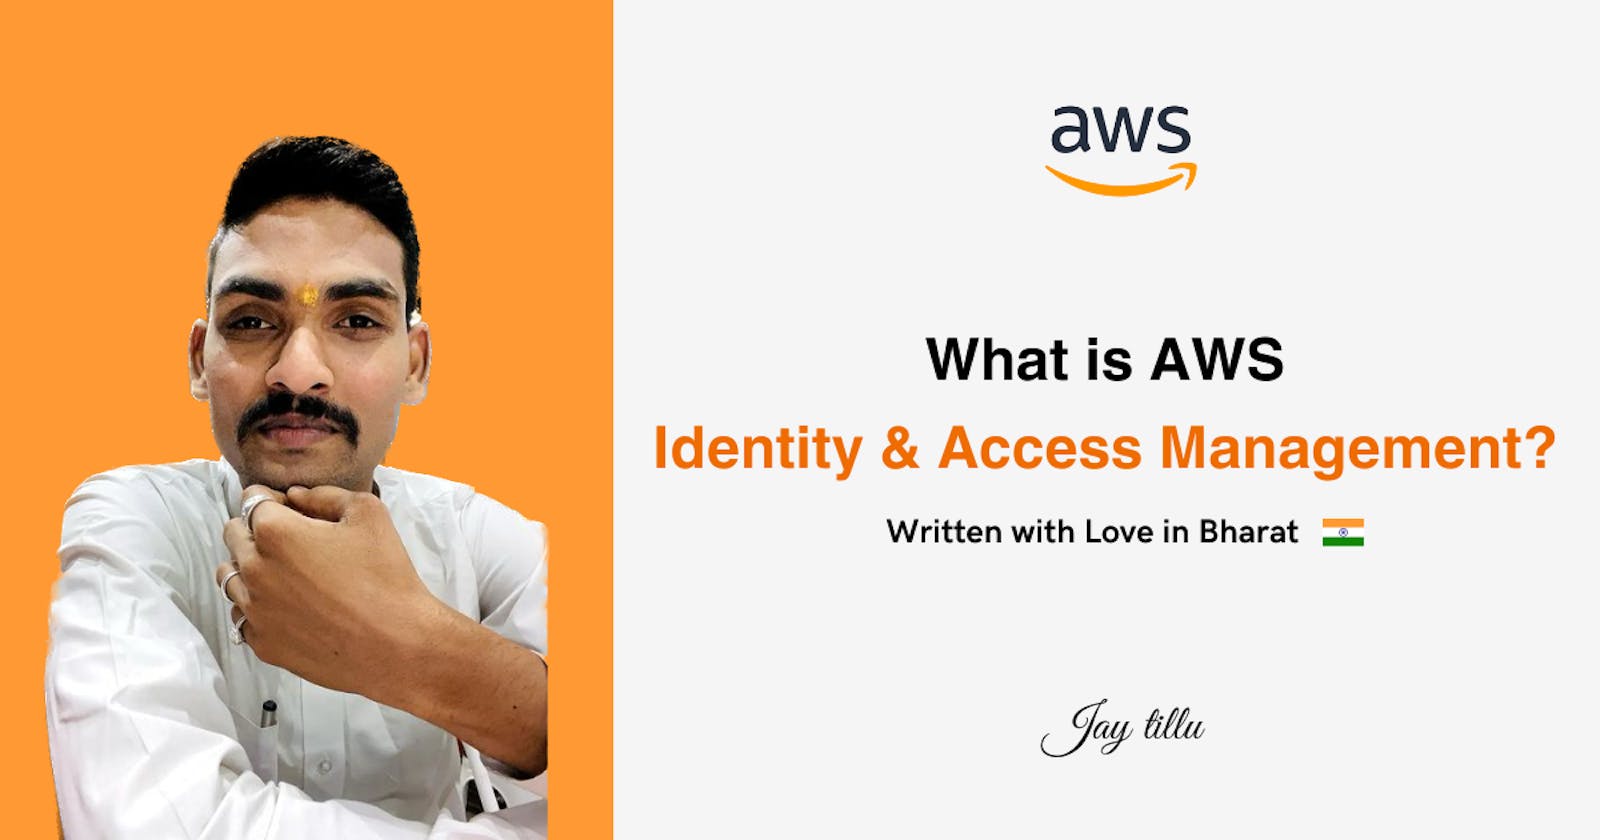 What is AWS Identity and Access Management (IAM)?